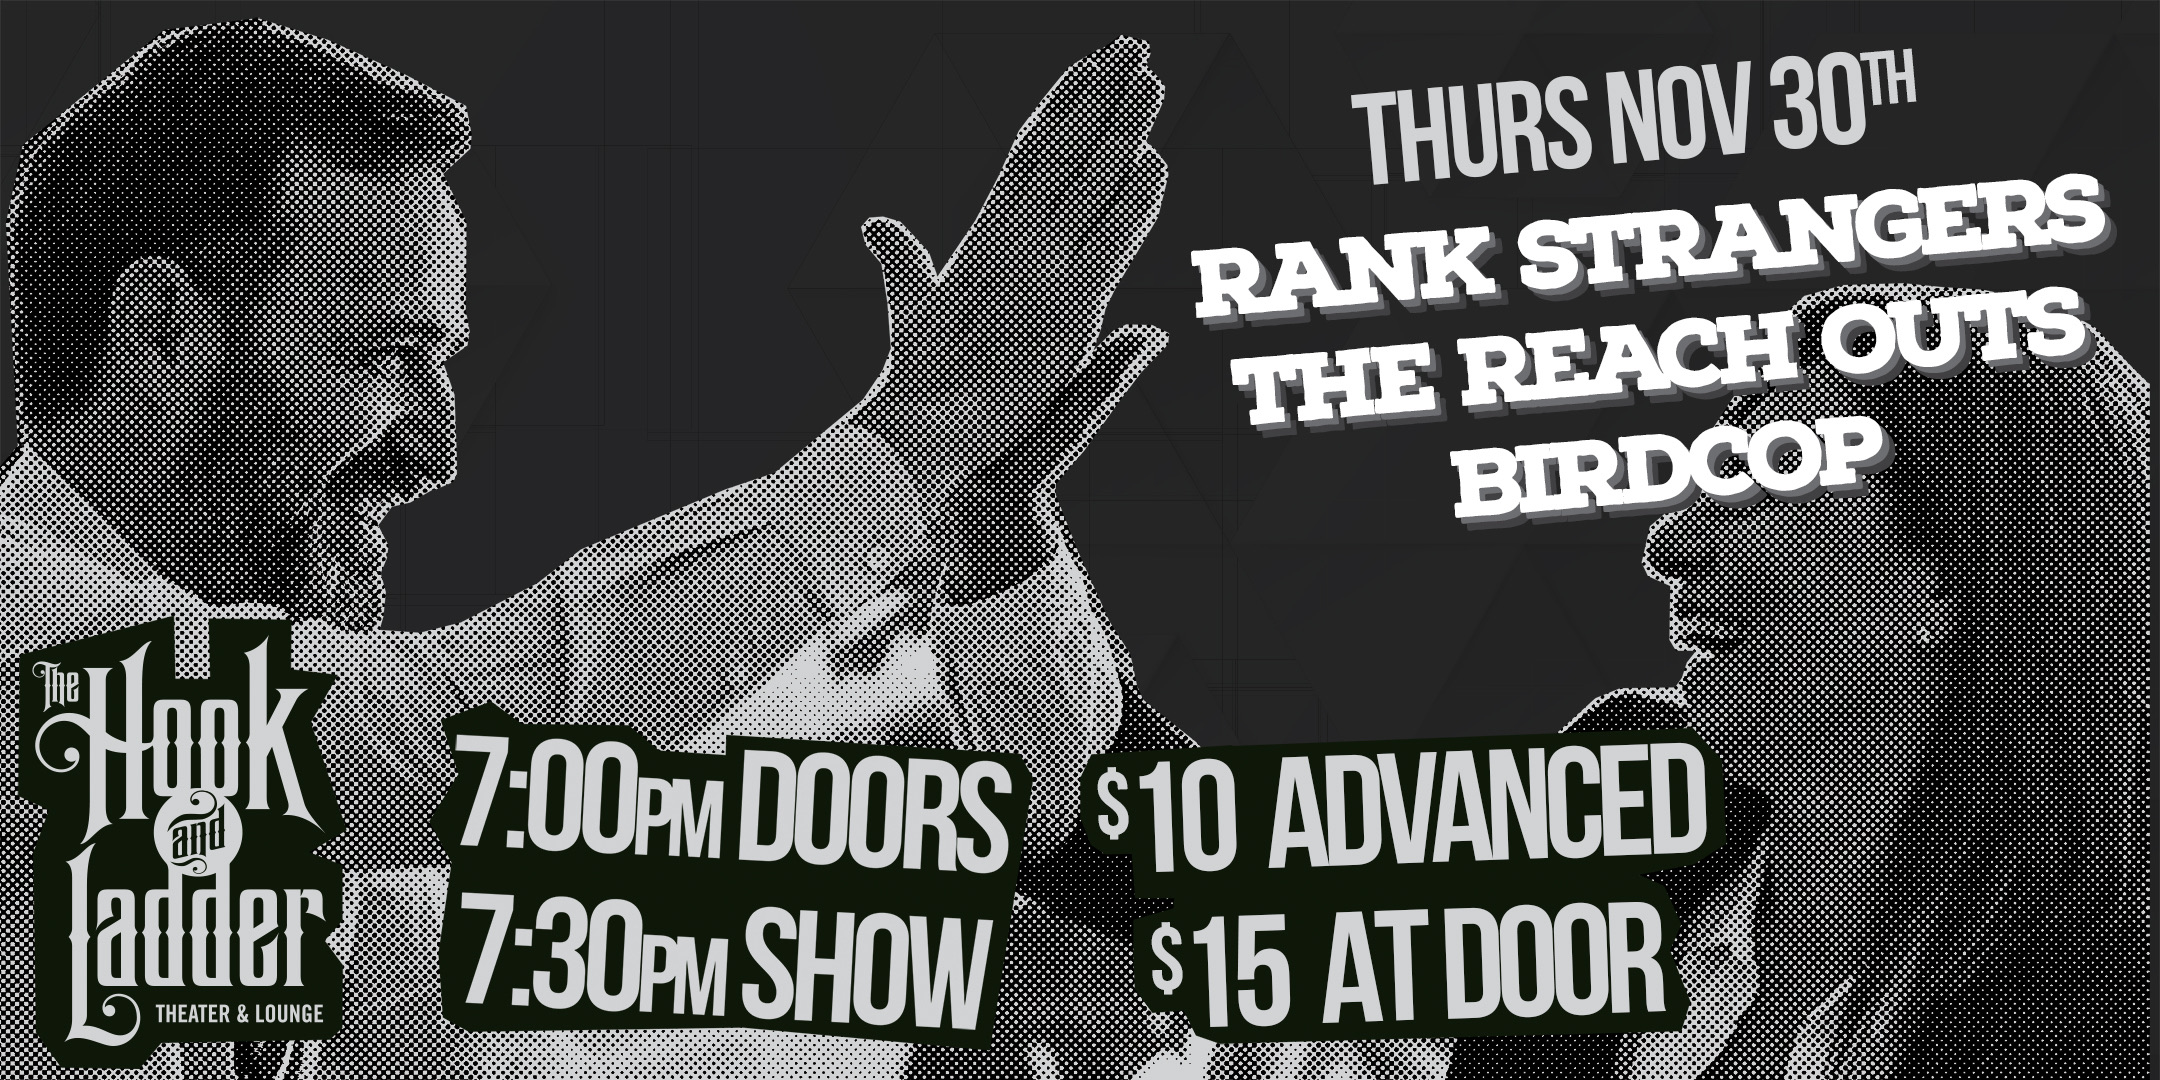 The Reach Outs (Winona), Rank Strangers, and BirdCop (Rochester) Thursday, November 30 The Mission Room at The Hook and Ladder Theater Doors 7:00pm :: Show 7:30pm :: 21+ General Admission*: $10 ADV/ $15 DOS